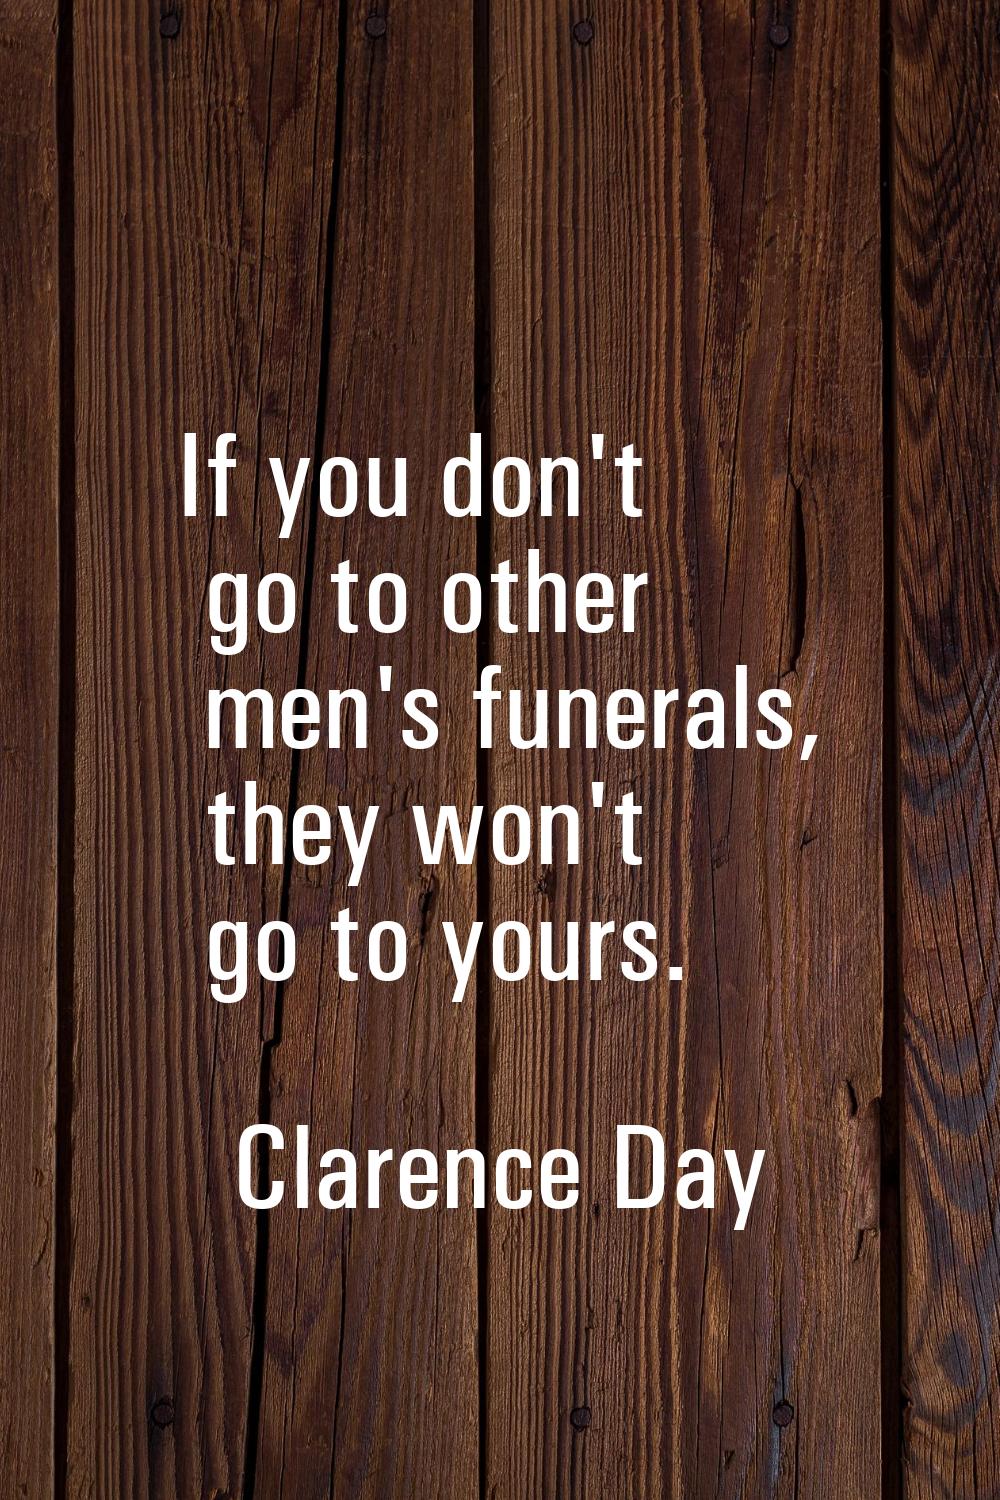 If you don't go to other men's funerals, they won't go to yours.